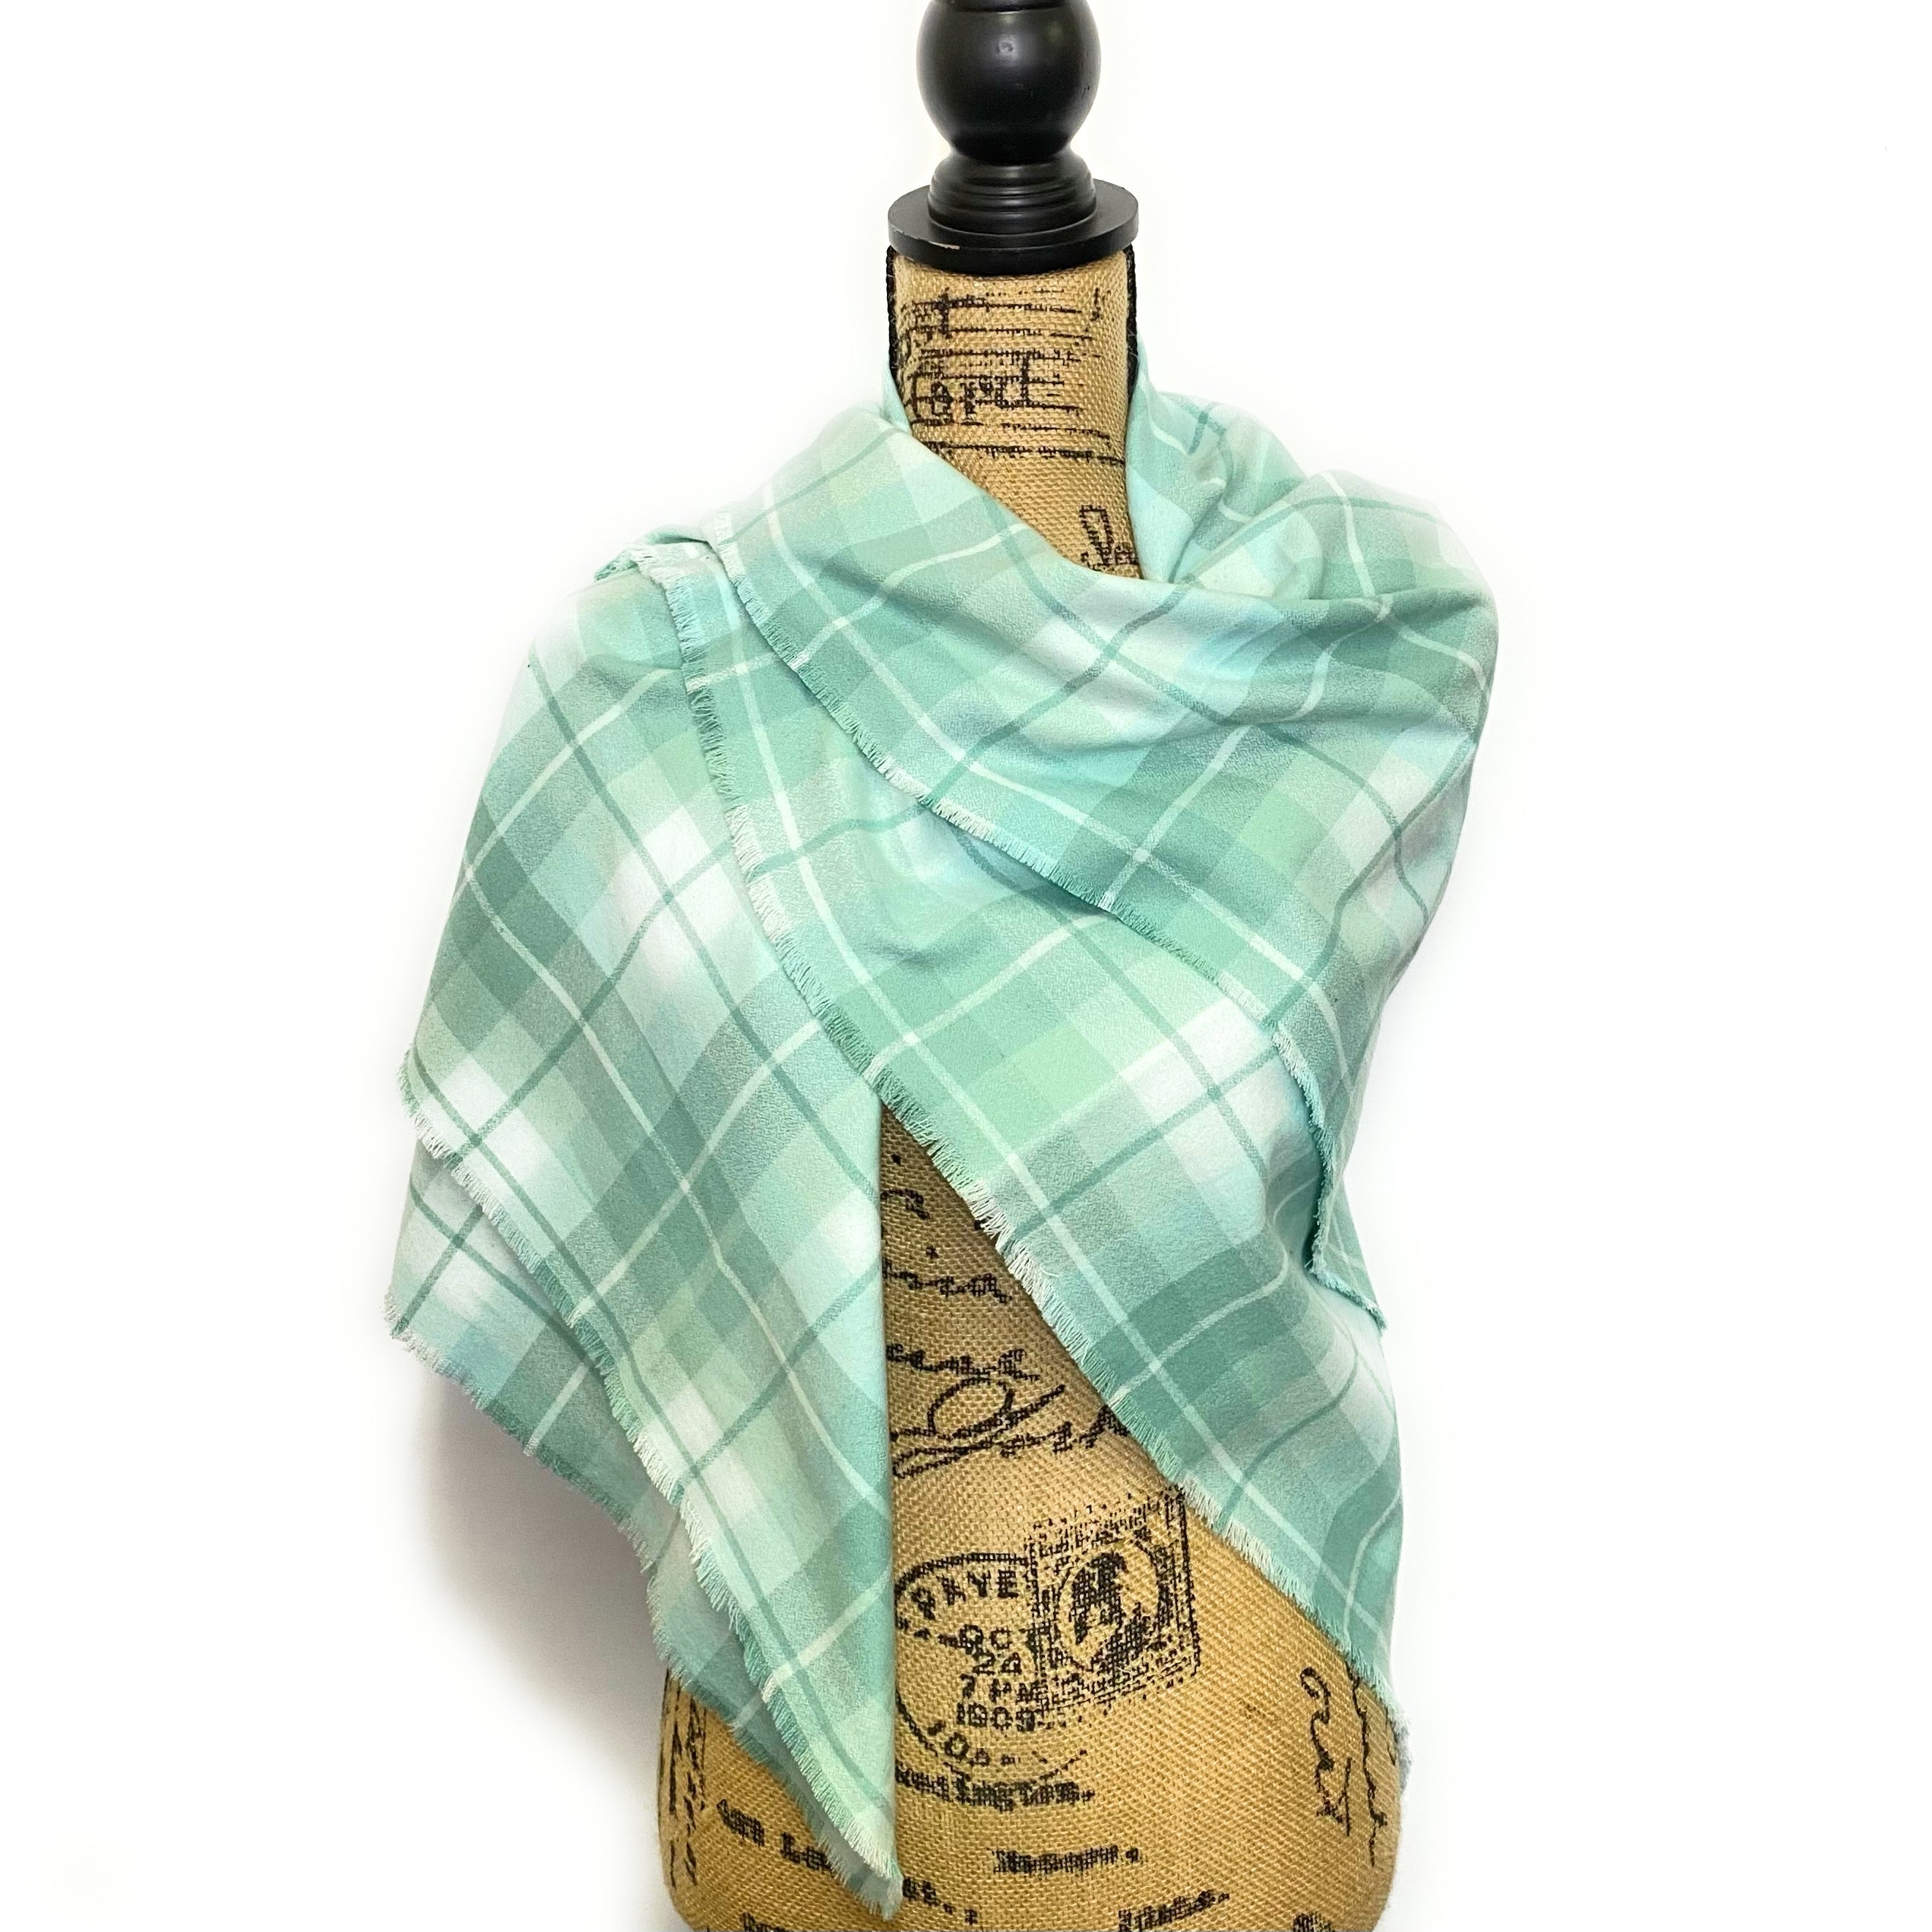 100% Organic Cotton Light Aqua and Minty Green Plaid Infinity and Blanket Scarves